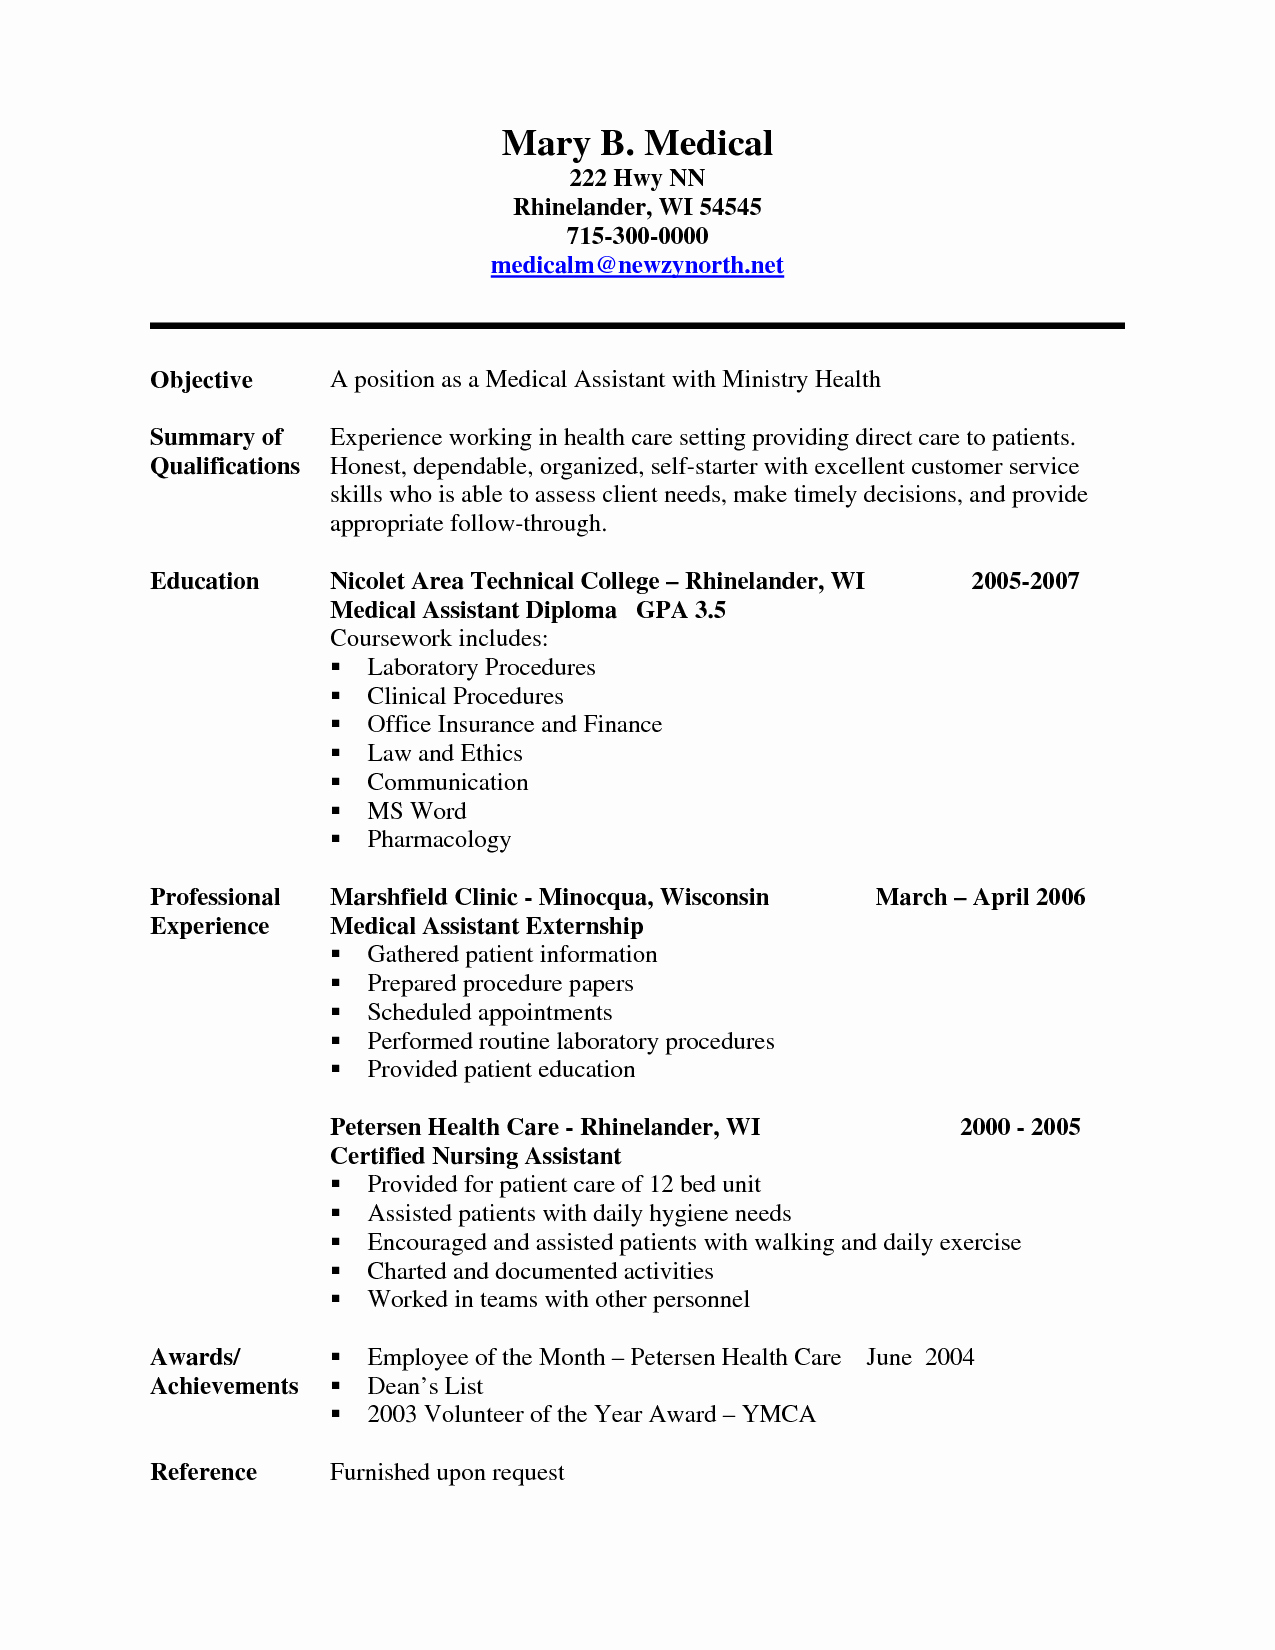 Resume Template for Medical assistant Awesome Experienced Medical assistant Resume Sample Cakepins